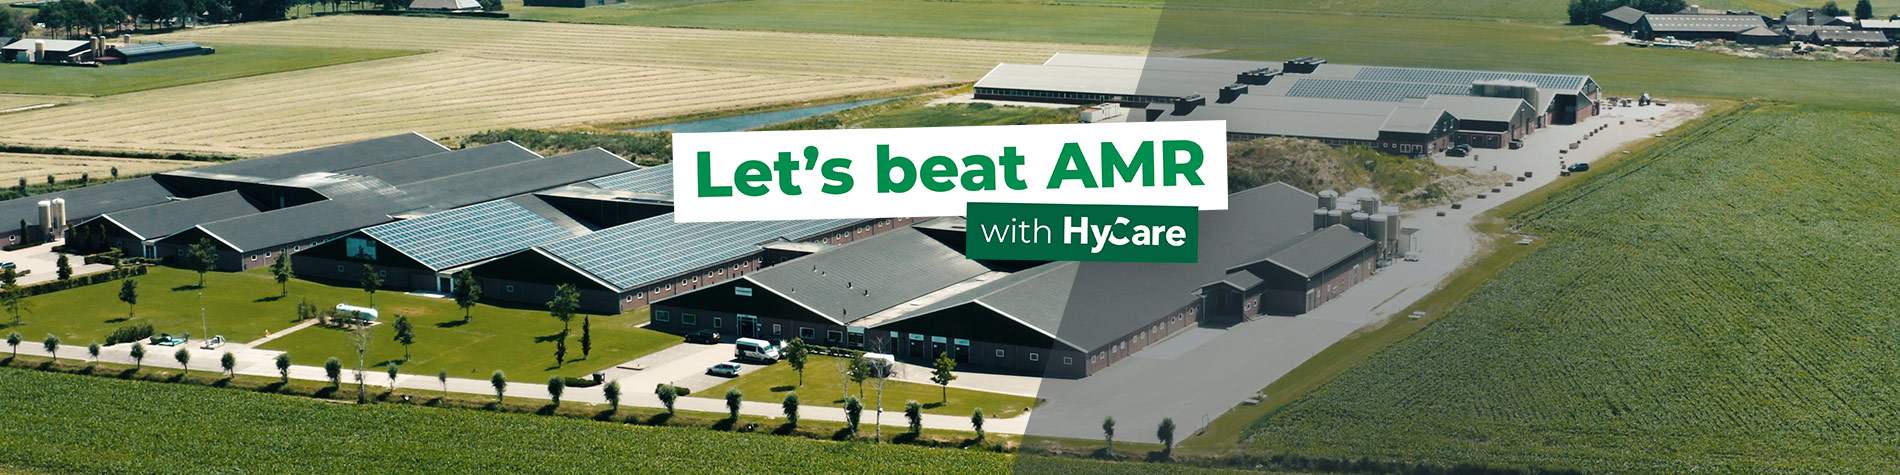 Let's beat AMR with HyCare